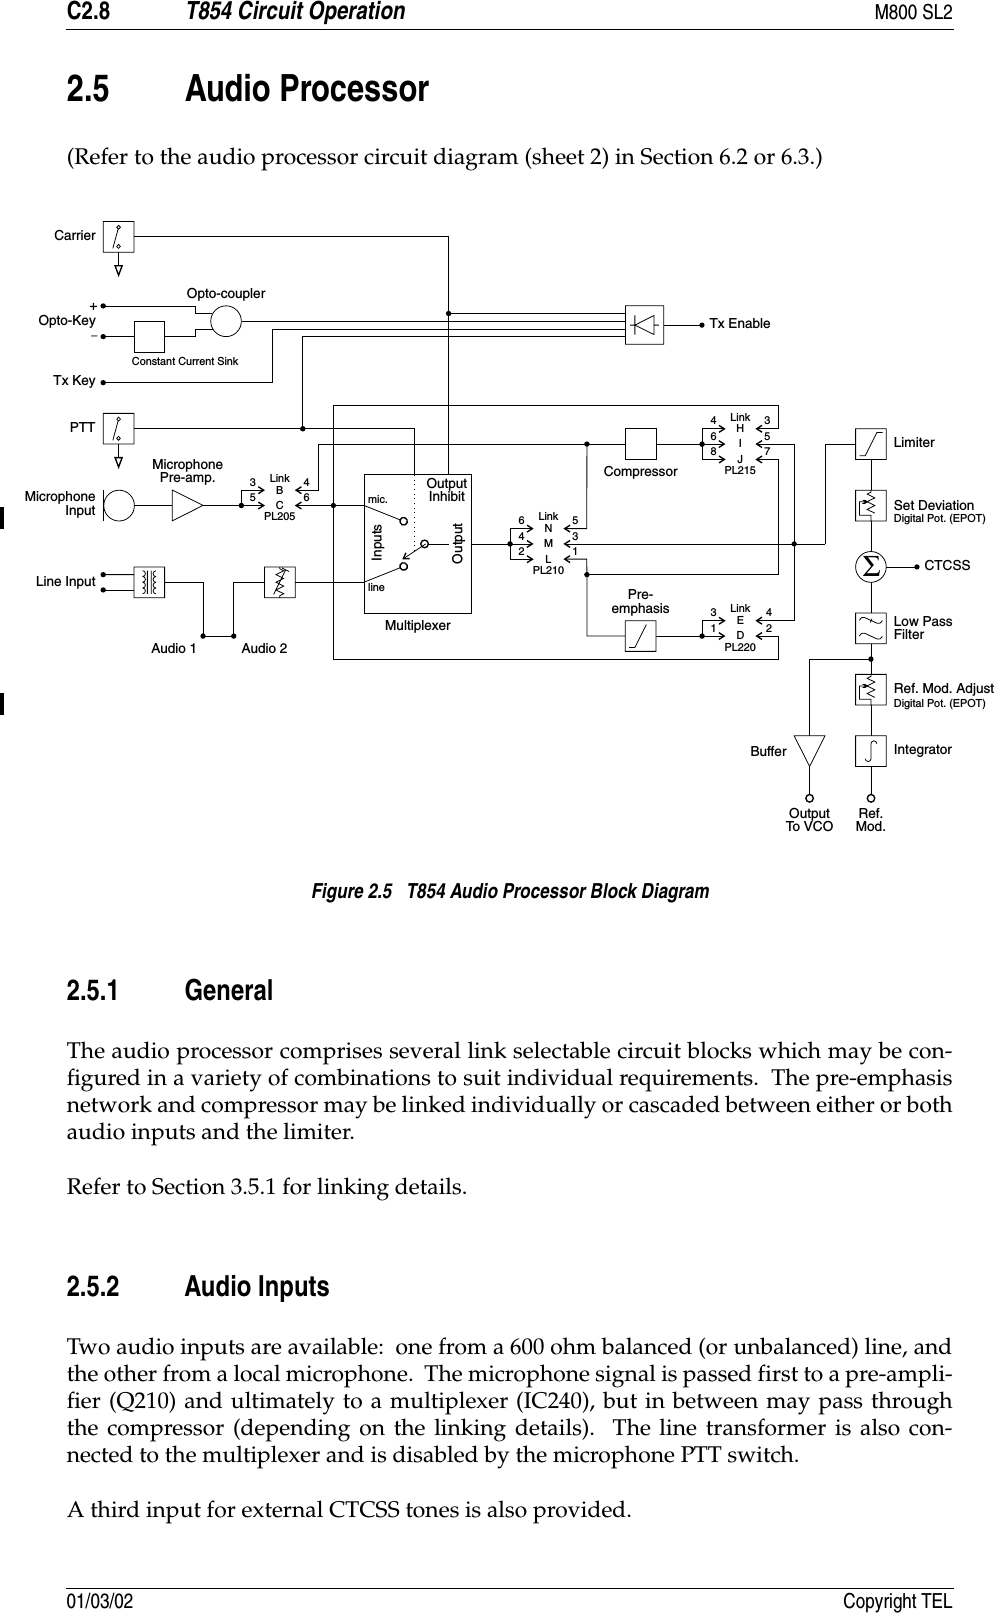 C2.8 T854 Circuit Operation M800 SL201/03/02 Copyright TEL2.5 Audio Processor(Refer to the audio processor circuit diagram (sheet 2) in Section 6.2 or 6.3.)Figure 2.5   T854 Audio Processor Block Diagram2.5.1 GeneralThe audio processor comprises several link selectable circuit blocks which may be con-figured in a variety of combinations to suit individual requirements.  The pre-emphasisnetwork and compressor may be linked individually or cascaded between either or bothaudio inputs and the limiter.Refer to Section 3.5.1 for linking details.2.5.2 Audio InputsTwo audio inputs are available:  one from a 600 ohm balanced (or unbalanced) line, andthe other from a local microphone.  The microphone signal is passed first to a pre-ampli-fier (Q210) and ultimately to a multiplexer (IC240), but in between may pass throughthe compressor (depending on the linking details).  The line transformer is also con-nected to the multiplexer and is disabled by the microphone PTT switch.A third input for external CTCSS tones is also provided.Pre-emphasis346BC56434253357128NHMIELJD461mic.lineMultiplexerInputsOutputOutputInhibitAudio 1 Audio 2CompressorLinkLinkLinkTx EnableΣCarrierOpto-KeyTx KeyPTTMicrophoneInputLine InputMicrophonePre-amp.Opto-couplerLinkPL205PL215PL220PL210LimiterSet DeviationCTCSSLow PassFilterRef. Mod. AdjustIntegratorDigital Pot. (EPOT)Digital Pot. (EPOT)BufferOutputTo VCO Ref.Mod.Constant Current Sink+_